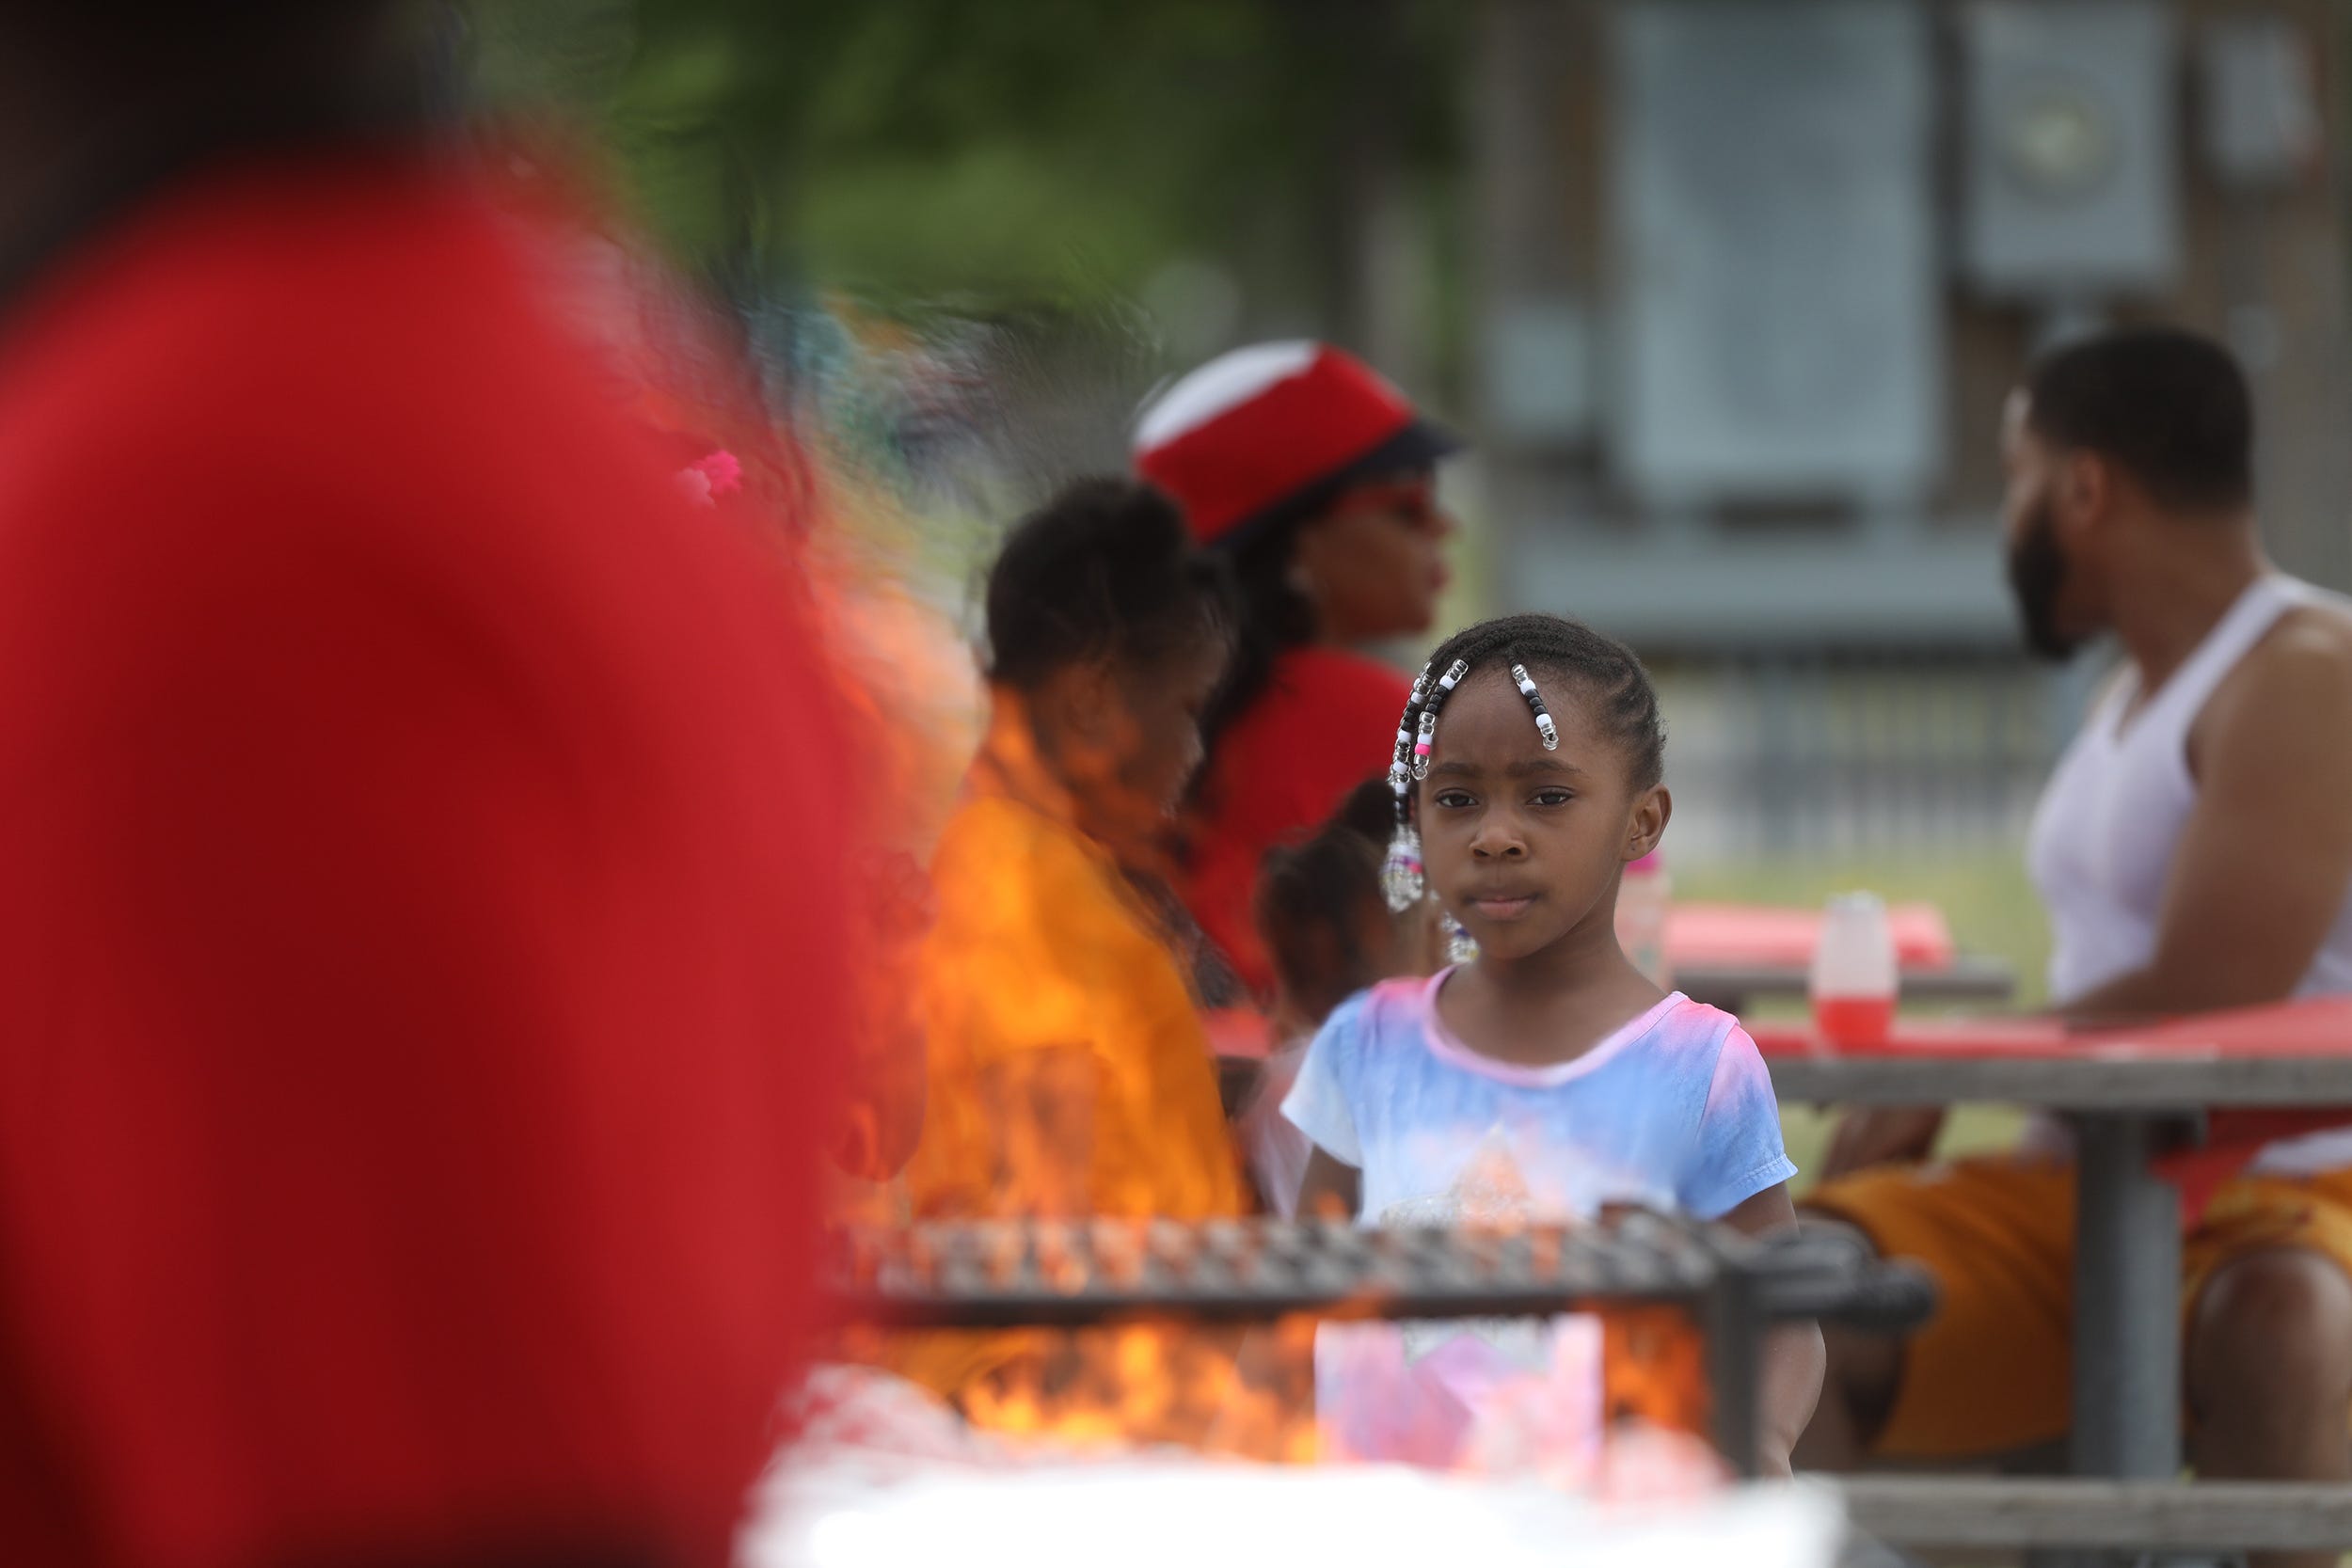 A child watches the flames that were just lit on the grill at a pavilion at Buffalo Harbor State Park on Lake Erie in Buffalo, NY on Saturday, July 23, 2022.  Cold Spring Bible Chapel held their annual family picnic that ended with members and anyone else who felt the calling to get baptized.